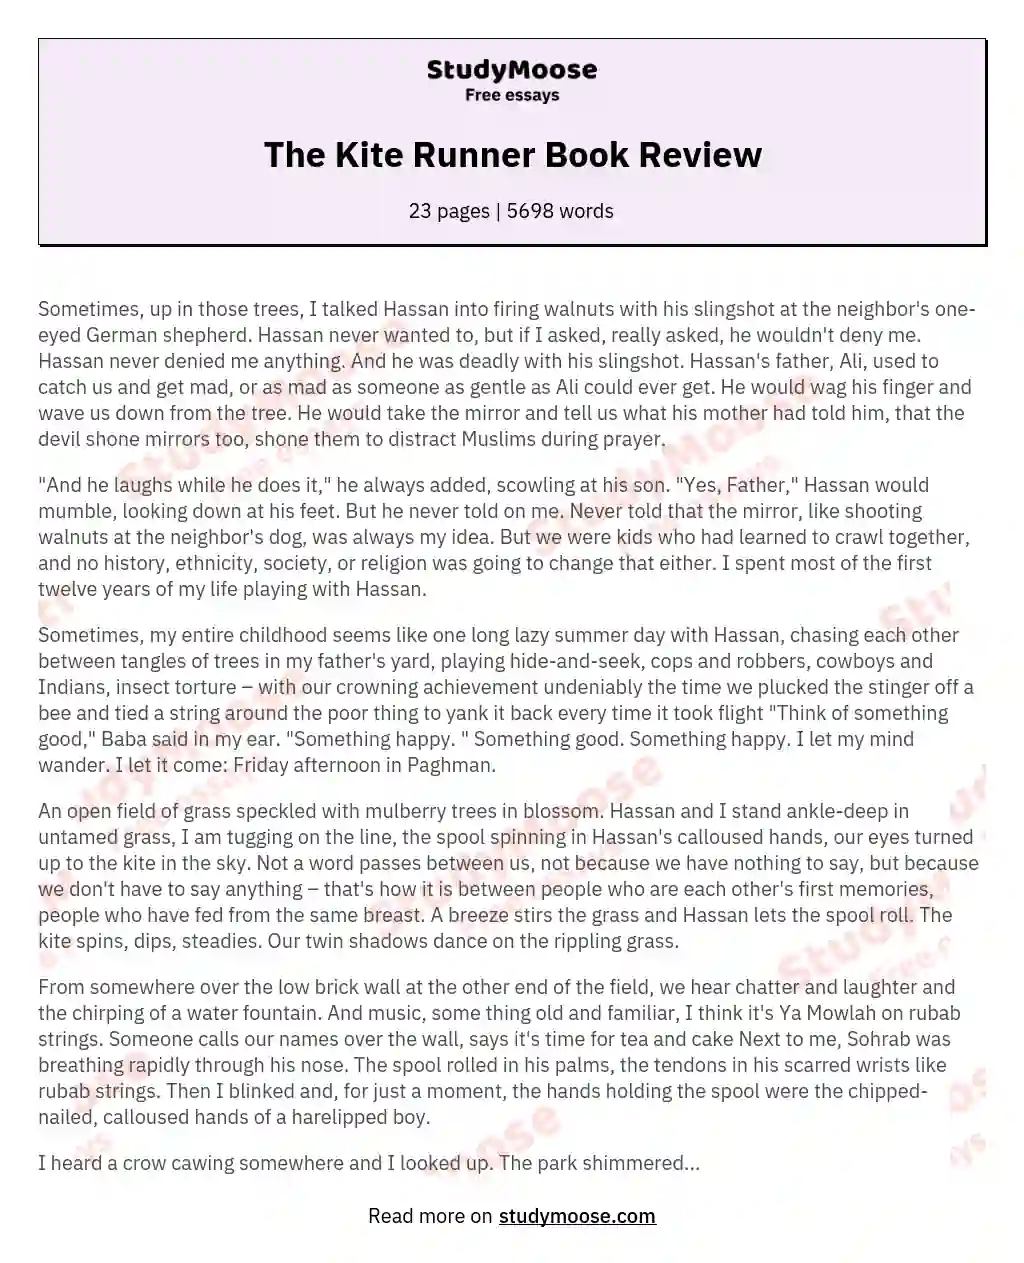 thesis on the kite runner